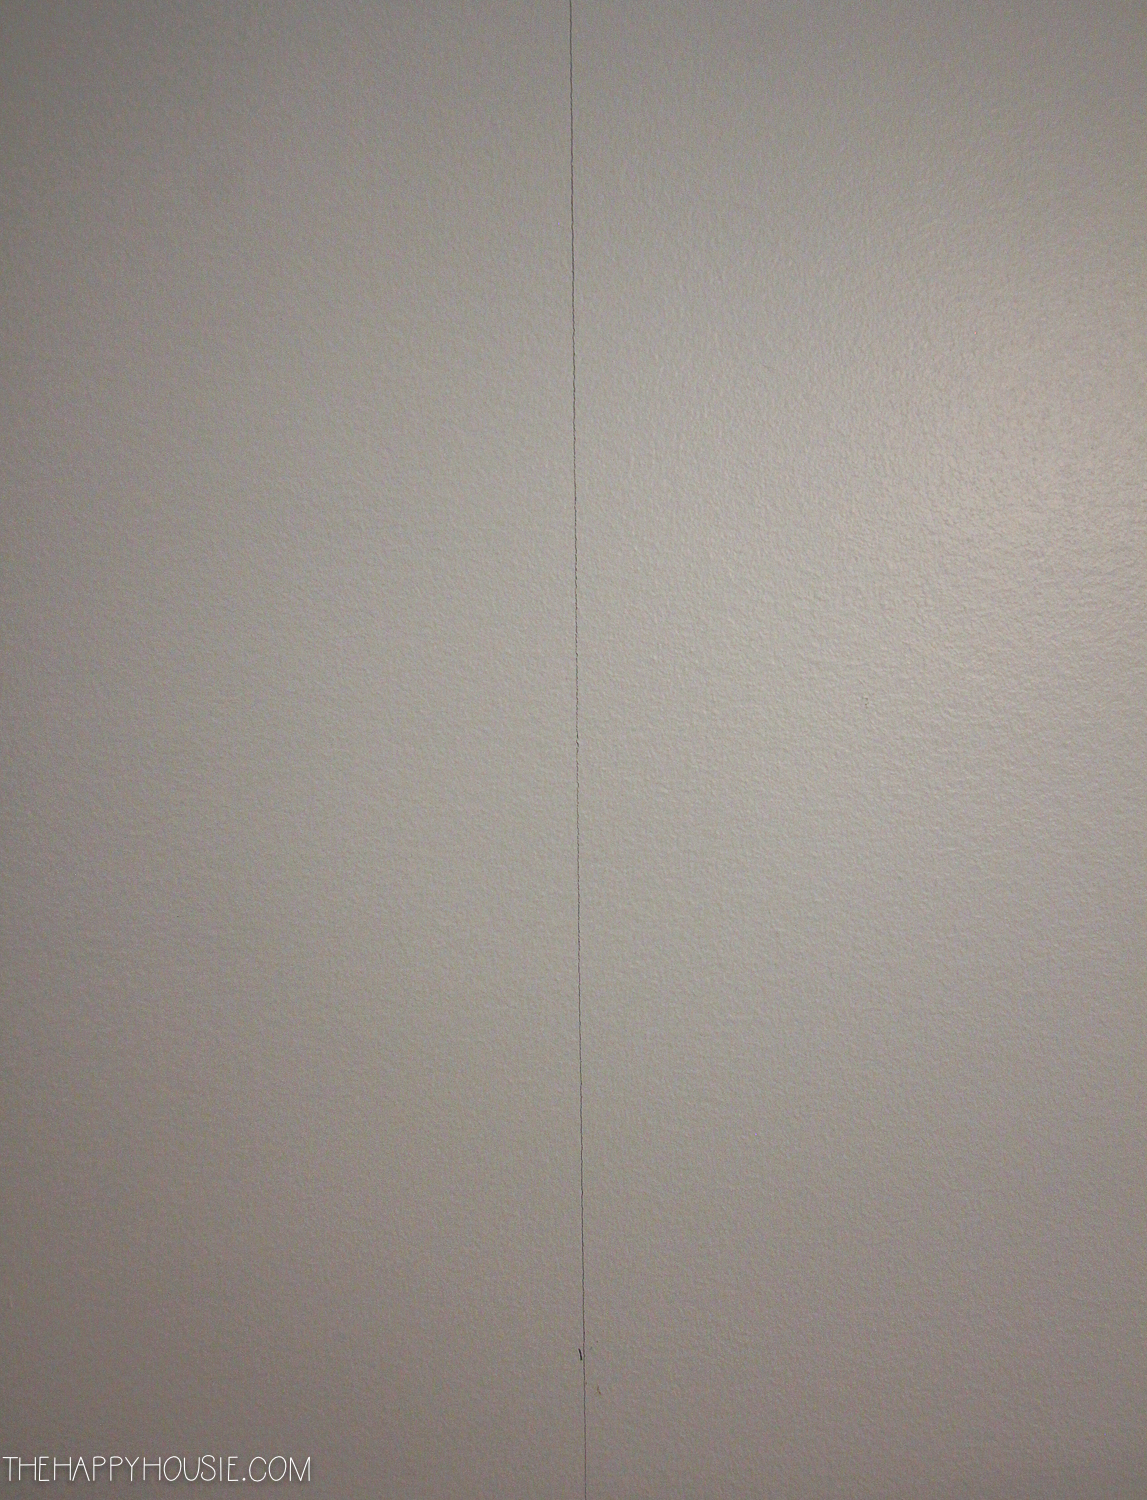 Pencil drawn line on the wall.